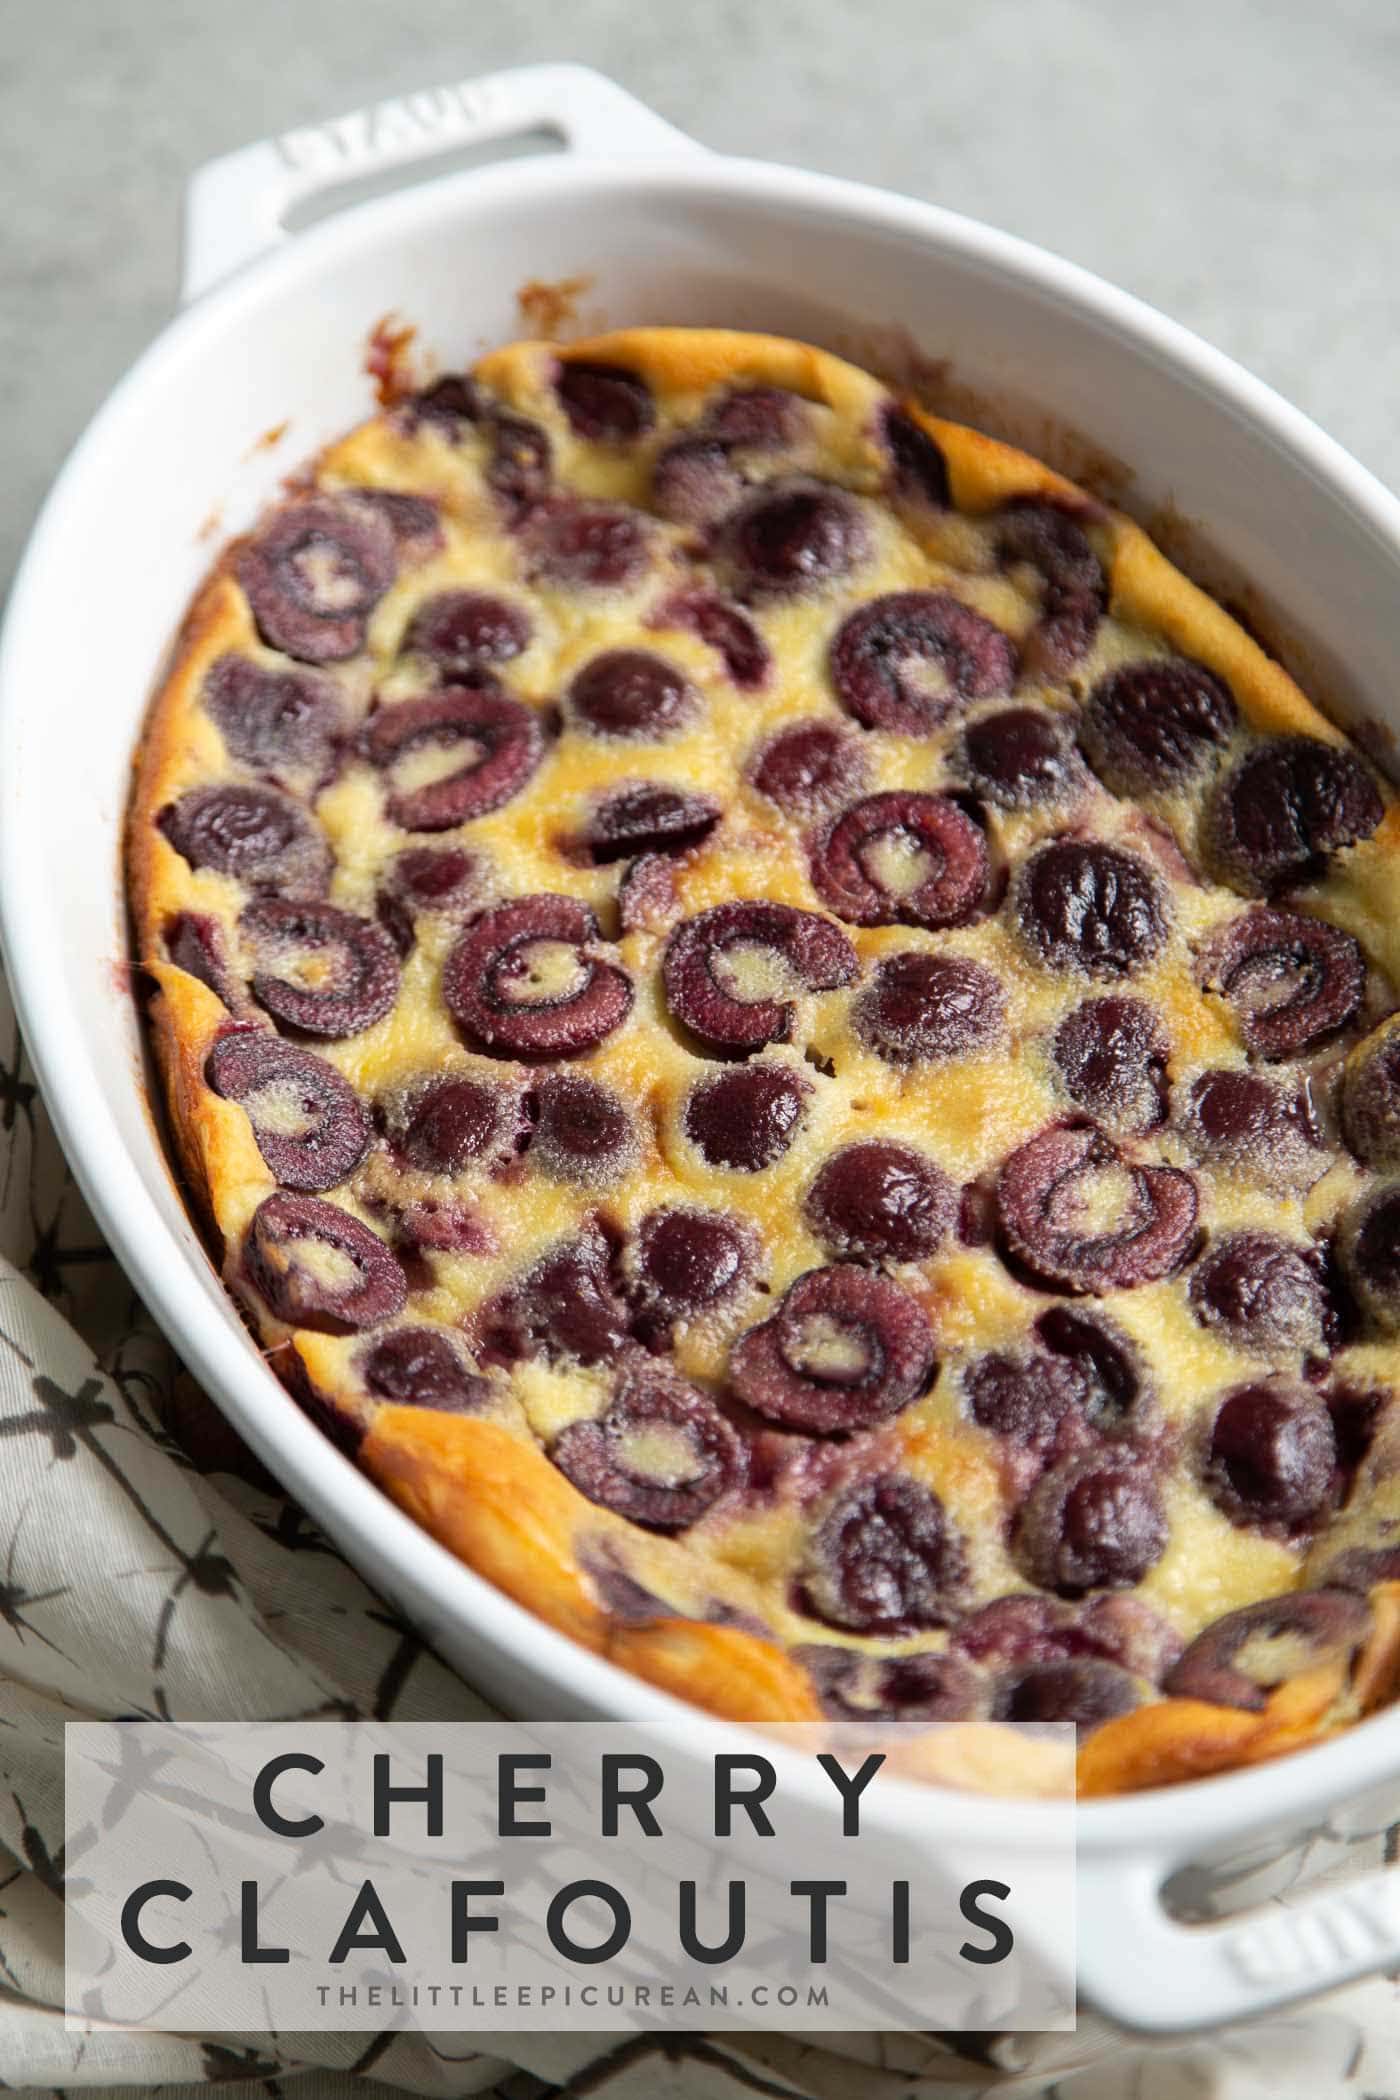 Cherry Clafoutis. Easy recipe that can be mixed together in a blender.